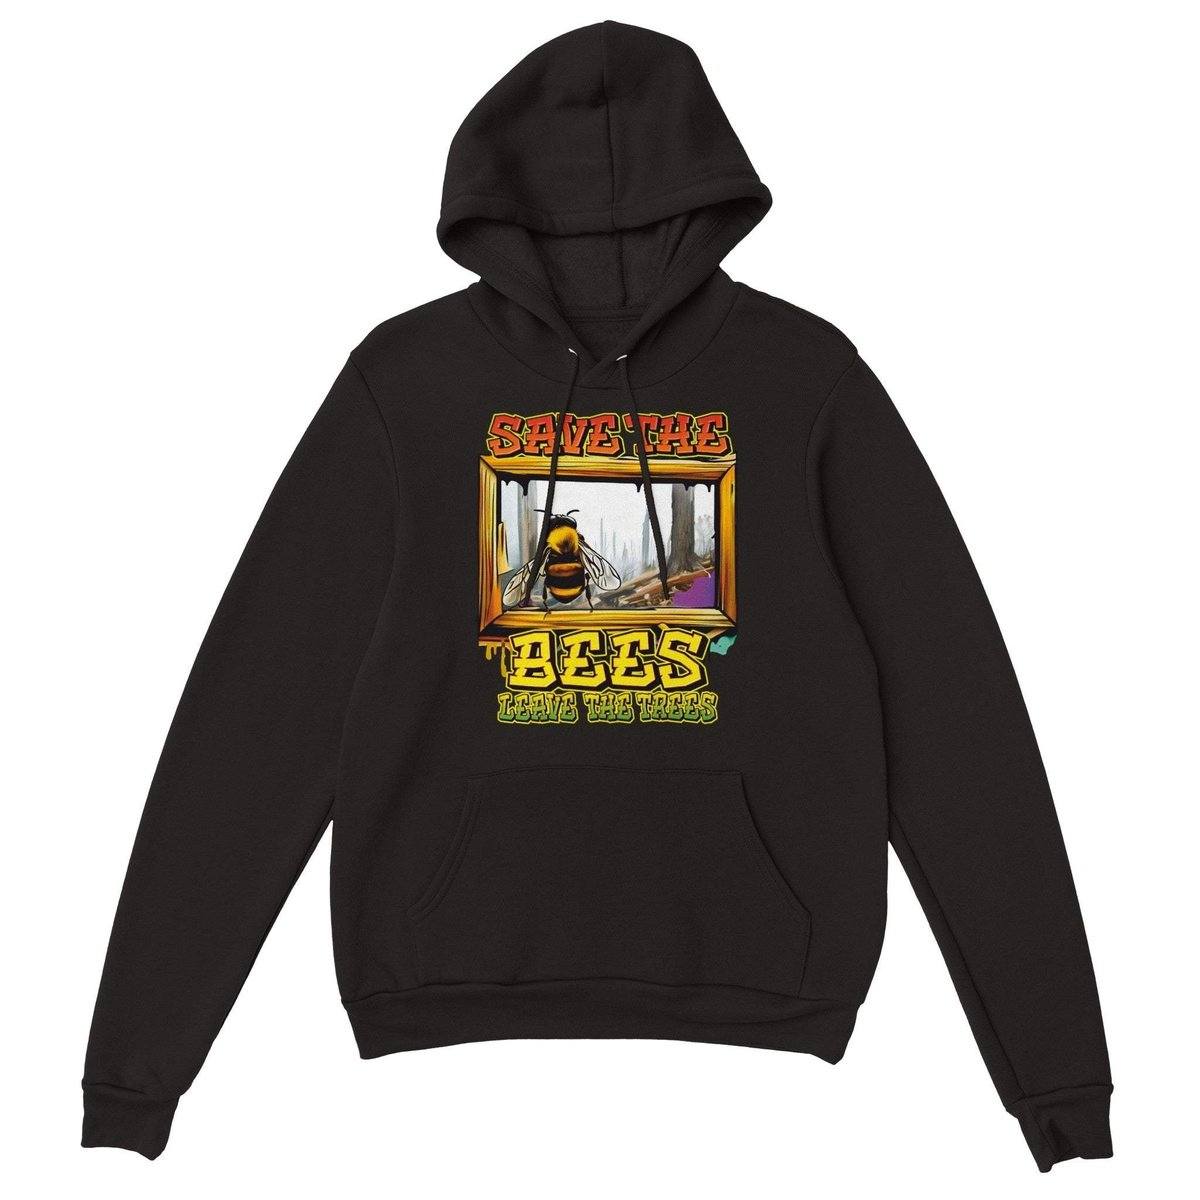 Save The Bees Hoodie - Leave The Trees - Premium Unisex Pullover Hoodie Australia Online Color Black / XS